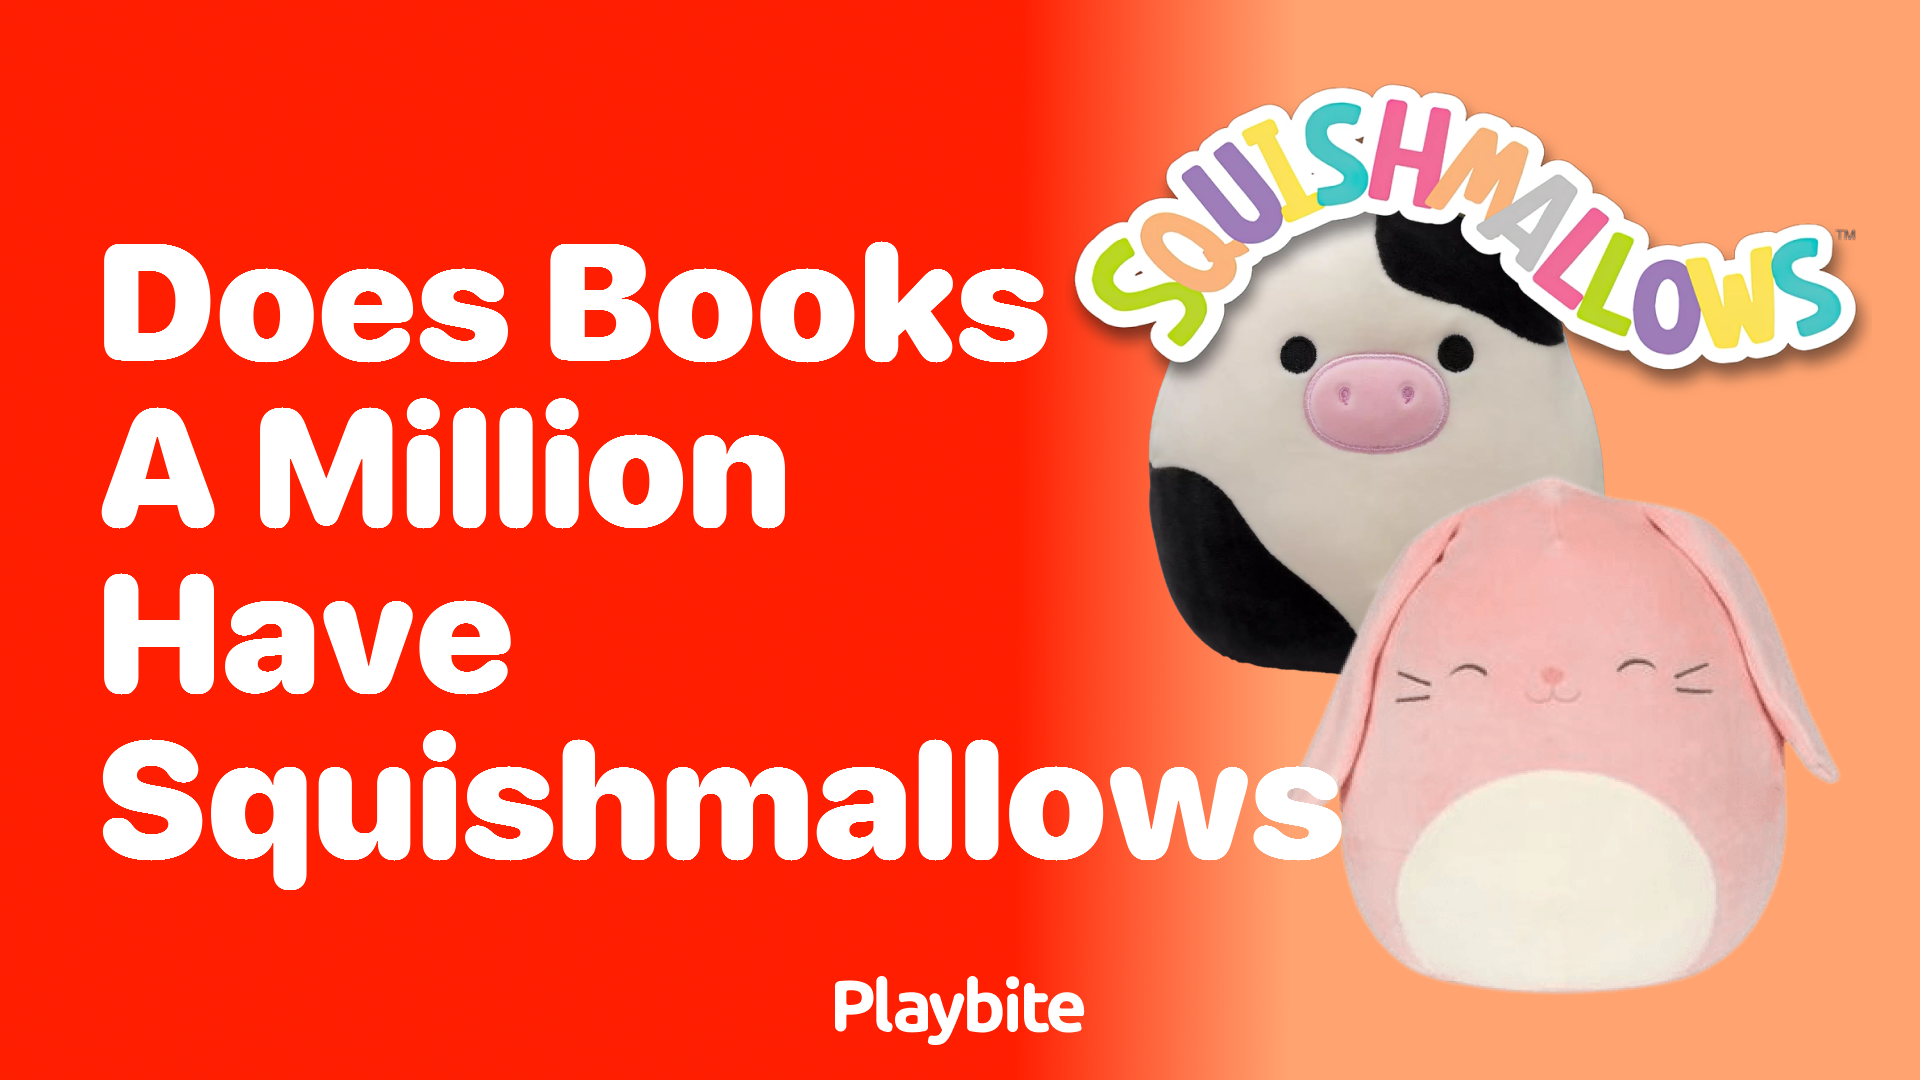 Does Books-A-Million Have Squishmallows? Find Out Here!